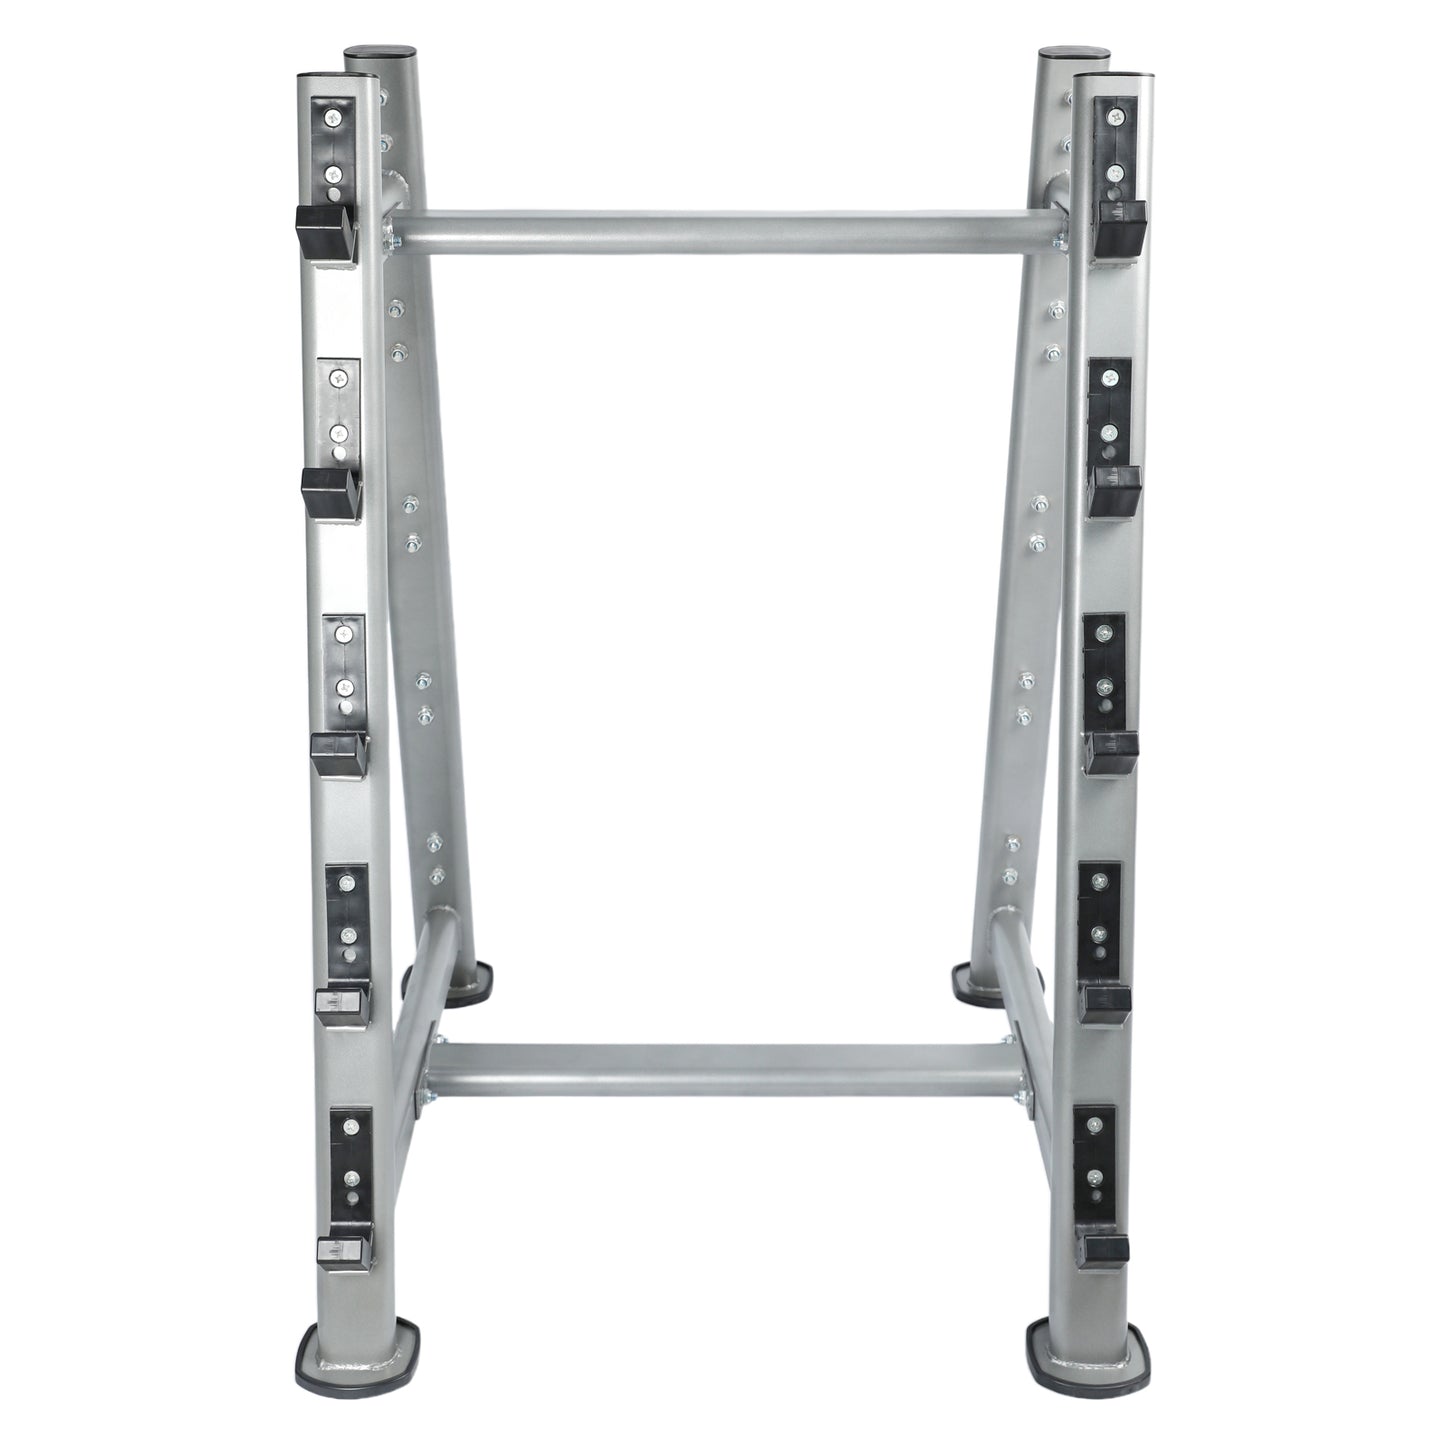 1441 Fitness Fixed Weight Curl Barbell Set - 10 kg to 30 kg With Rack